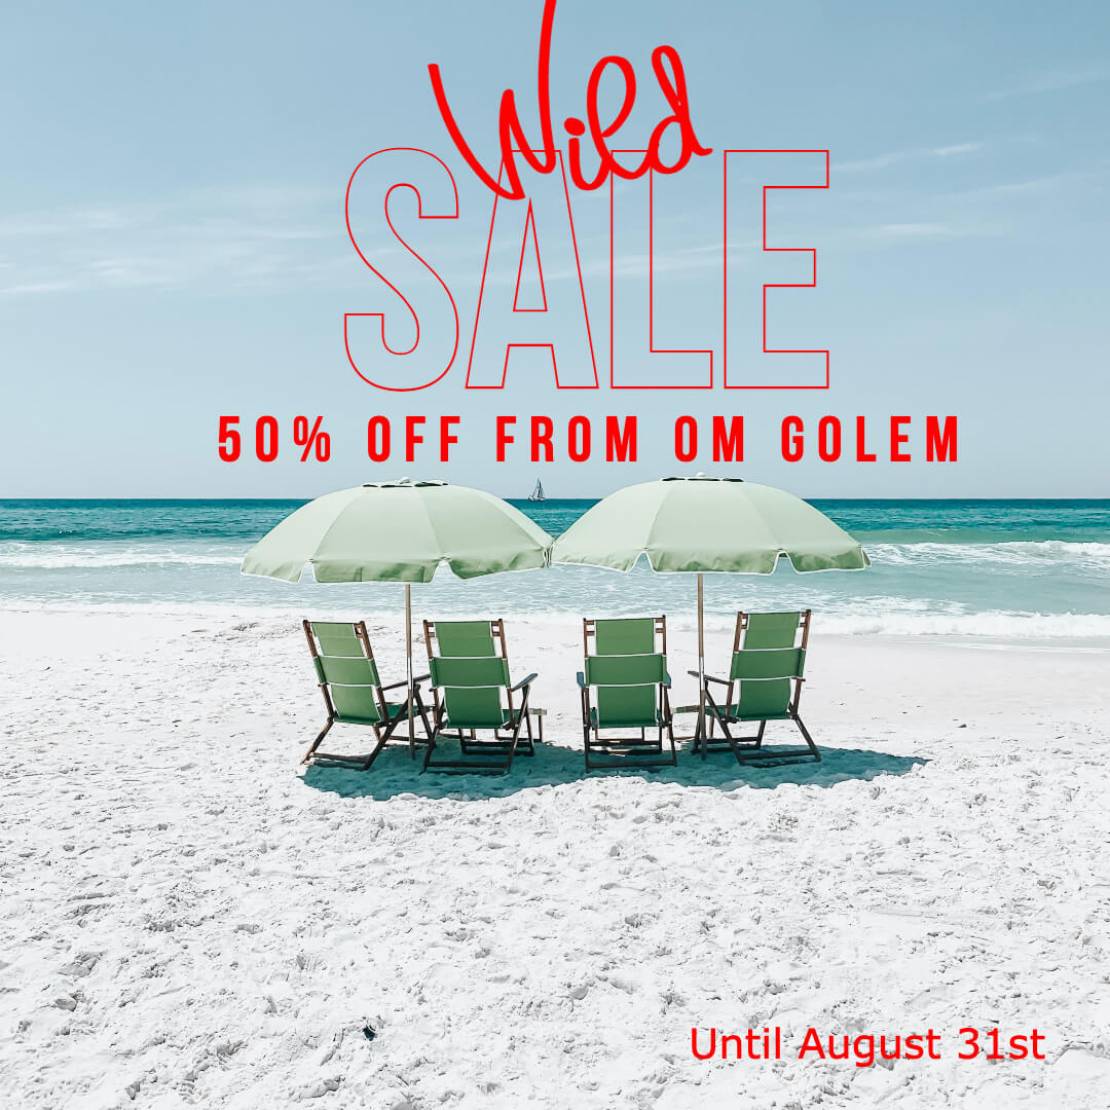 Summer sale 50% off from OM GOLEM until August 31st